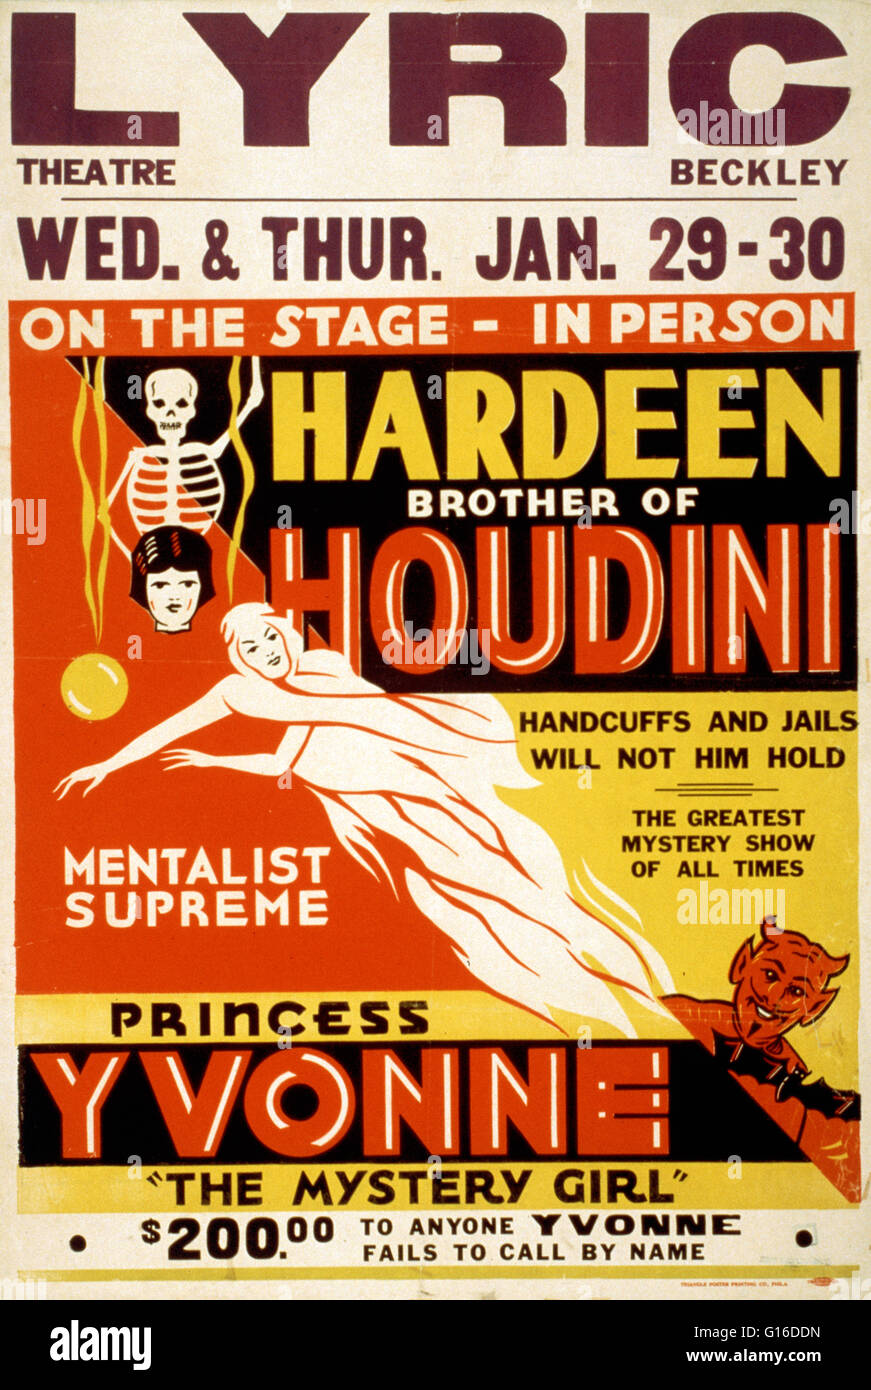 Entitled: 'On the stage - in person, Hardeen, brother of Houdini handcuffs and jails will not hold him : the greatest mystery show of all times. Mentalist supreme, Princess Yvonne, the mystery girl' lithograph poster created by Traingle Poster Printing Co Stock Photo